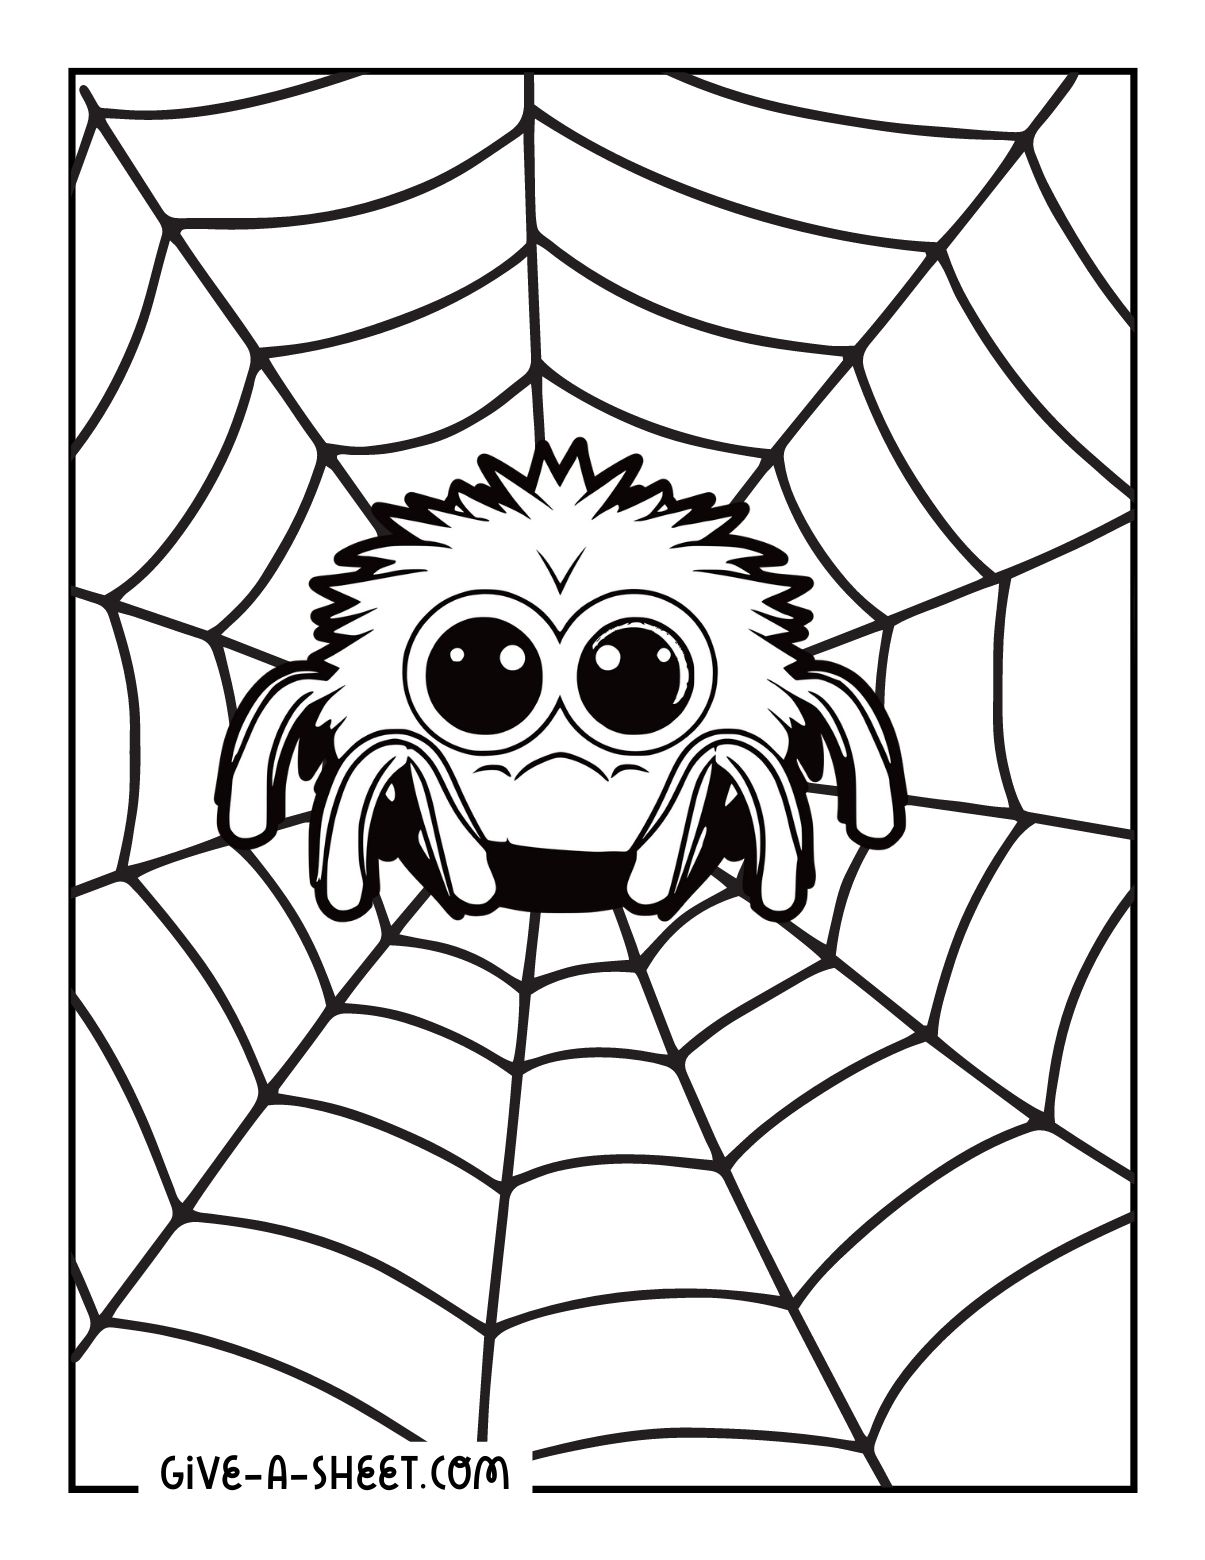 Kawaii tarantula coloring pages for kids of all ages.